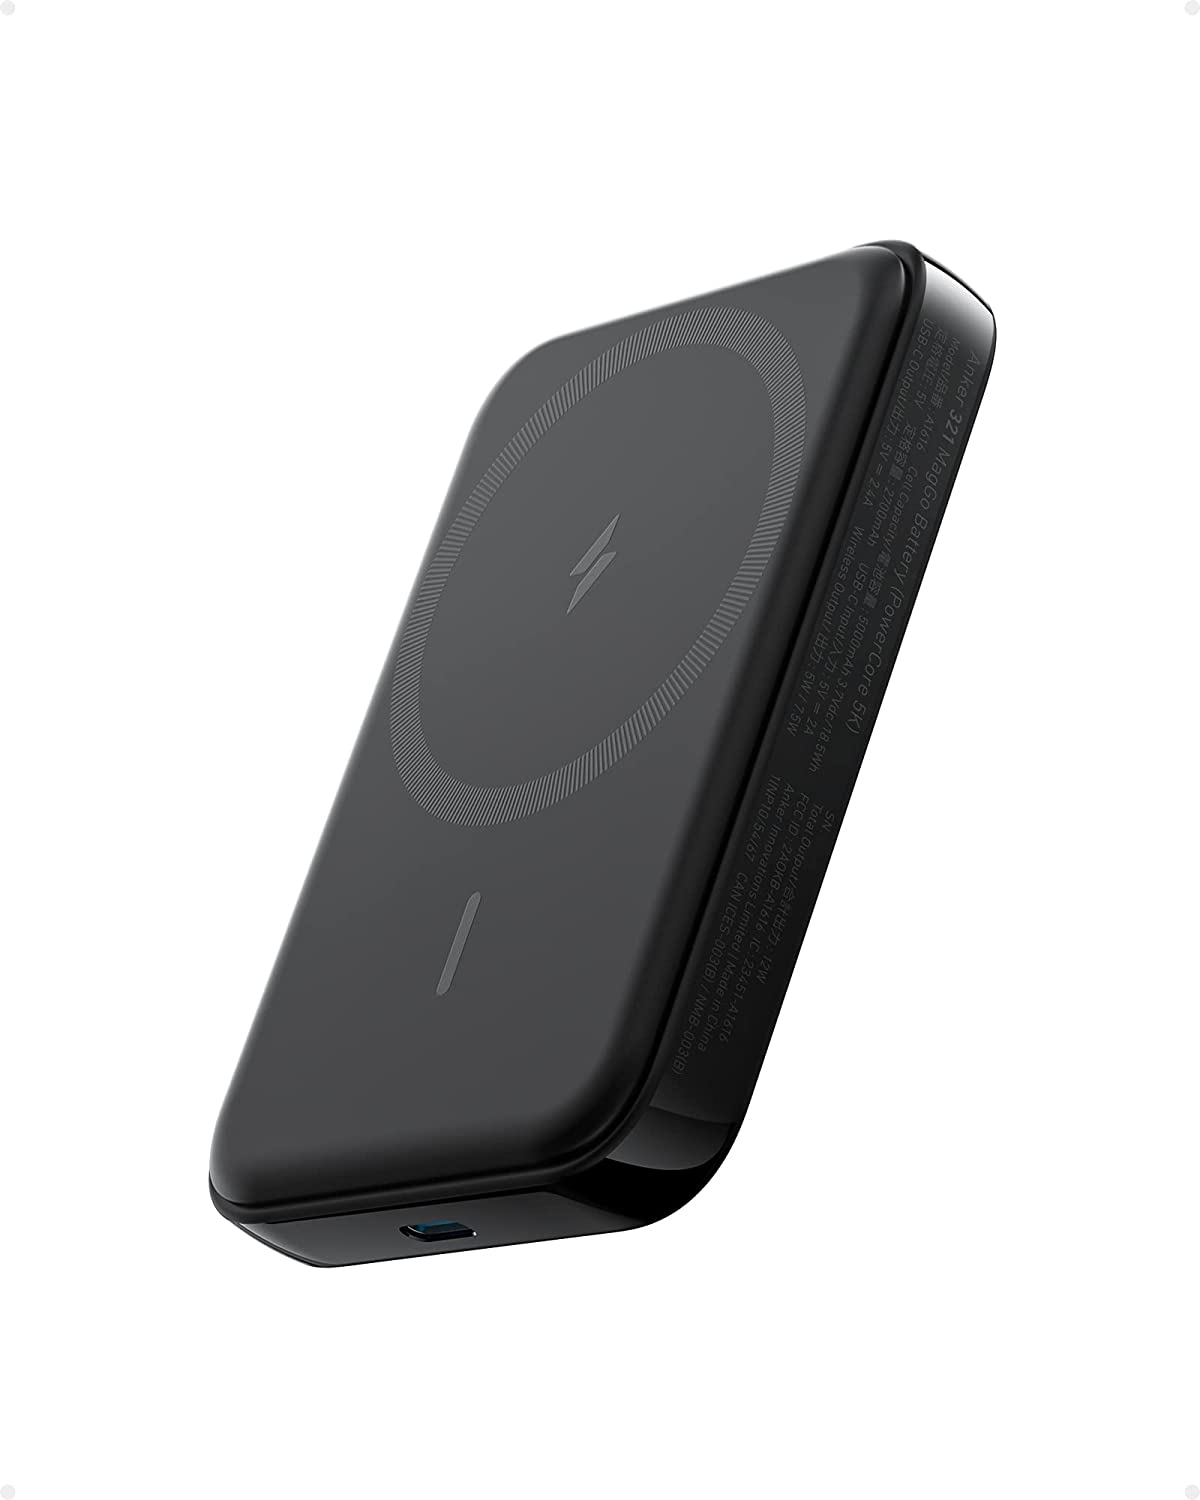 5000mAh Anker 321 MagGo Magnetic Wireless Portable Charger Battery (Black) $26 + Free Shipping